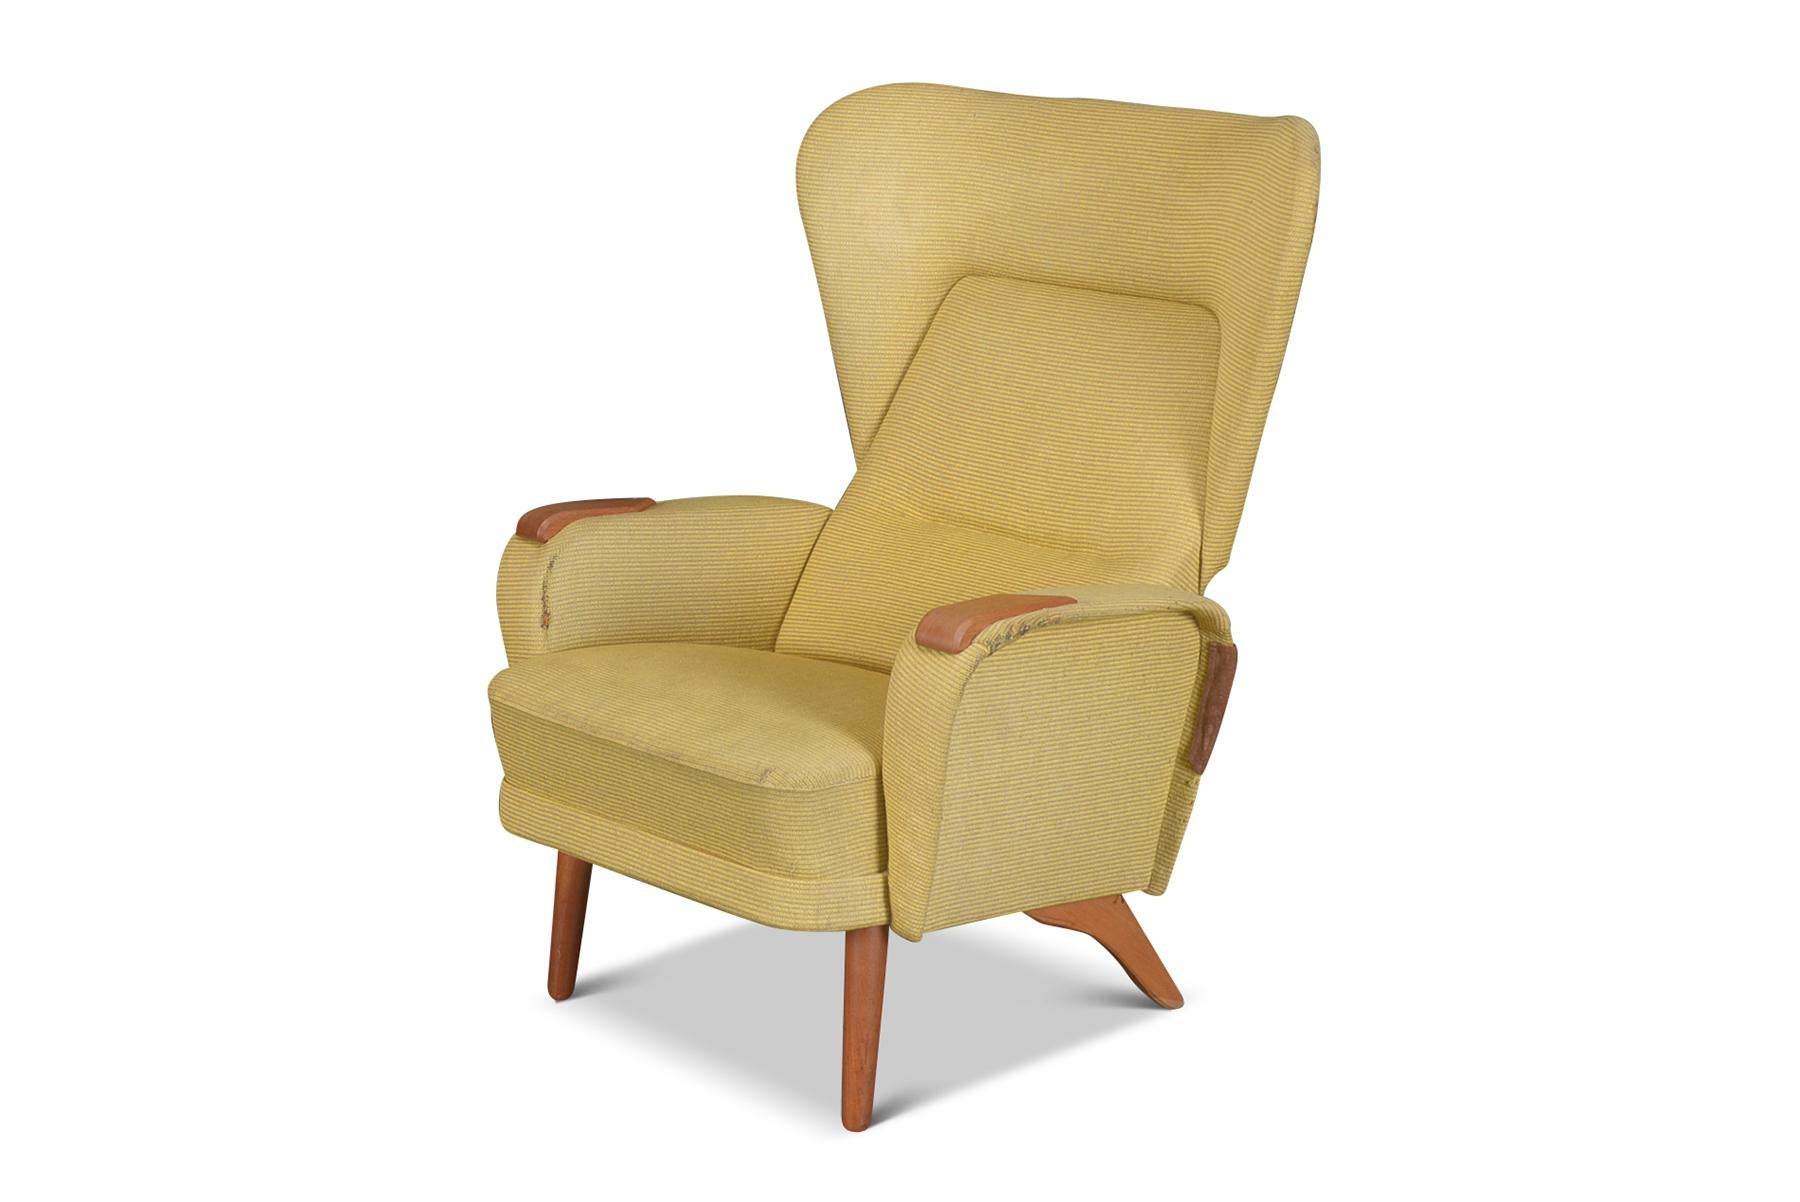 Danish Modern Curvy Wingback Chair in Teak + Yellow Wool In Excellent Condition For Sale In Berkeley, CA